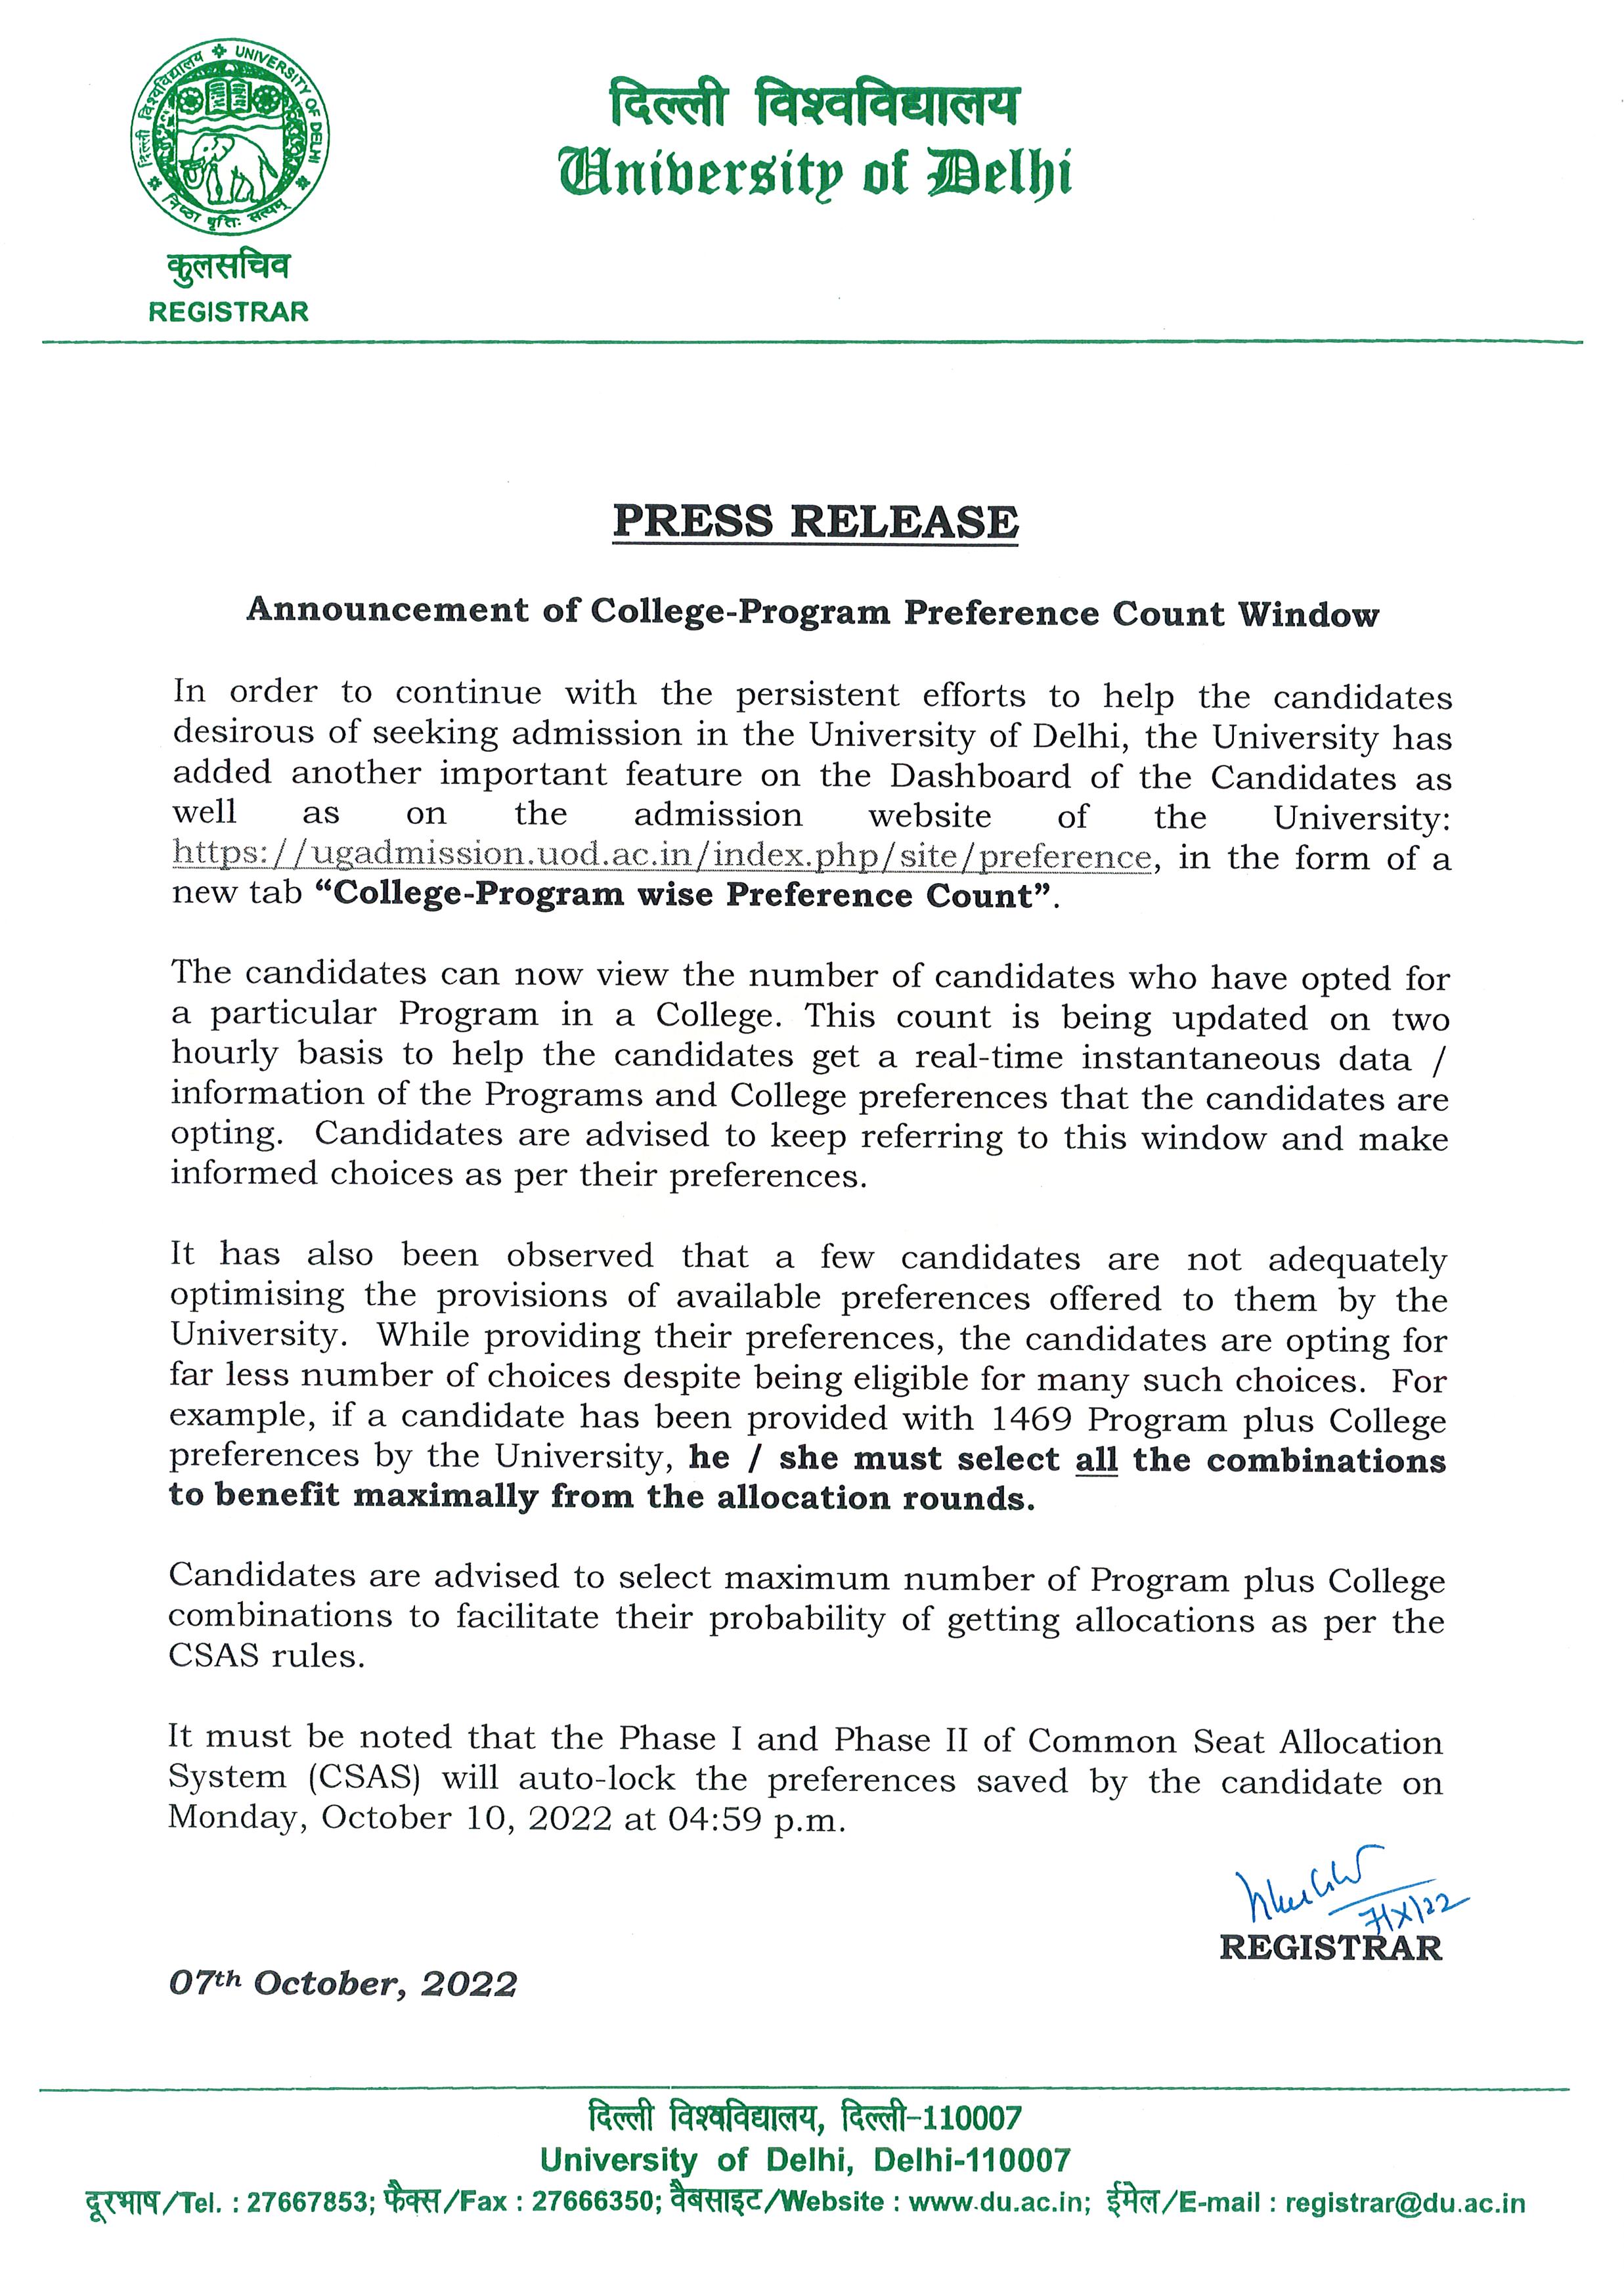 07-10-2022-Press Release - Announcement of College-Program preference Count Window - DU